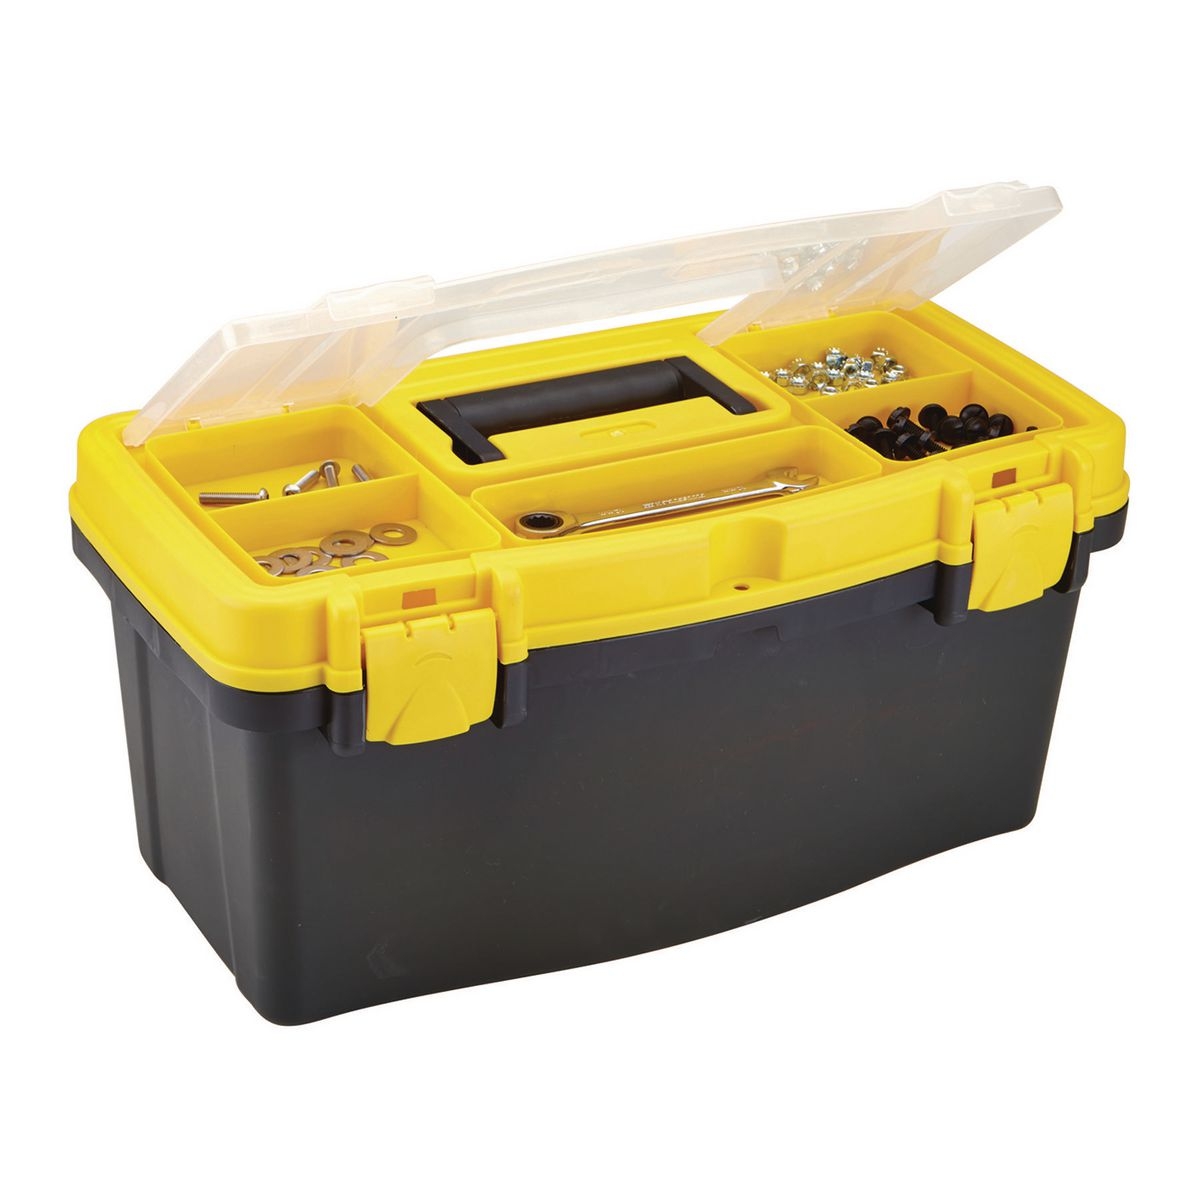 VOYAGER 19 In Toolbox with Top Tray - Item 66491 / 62809 / 92551